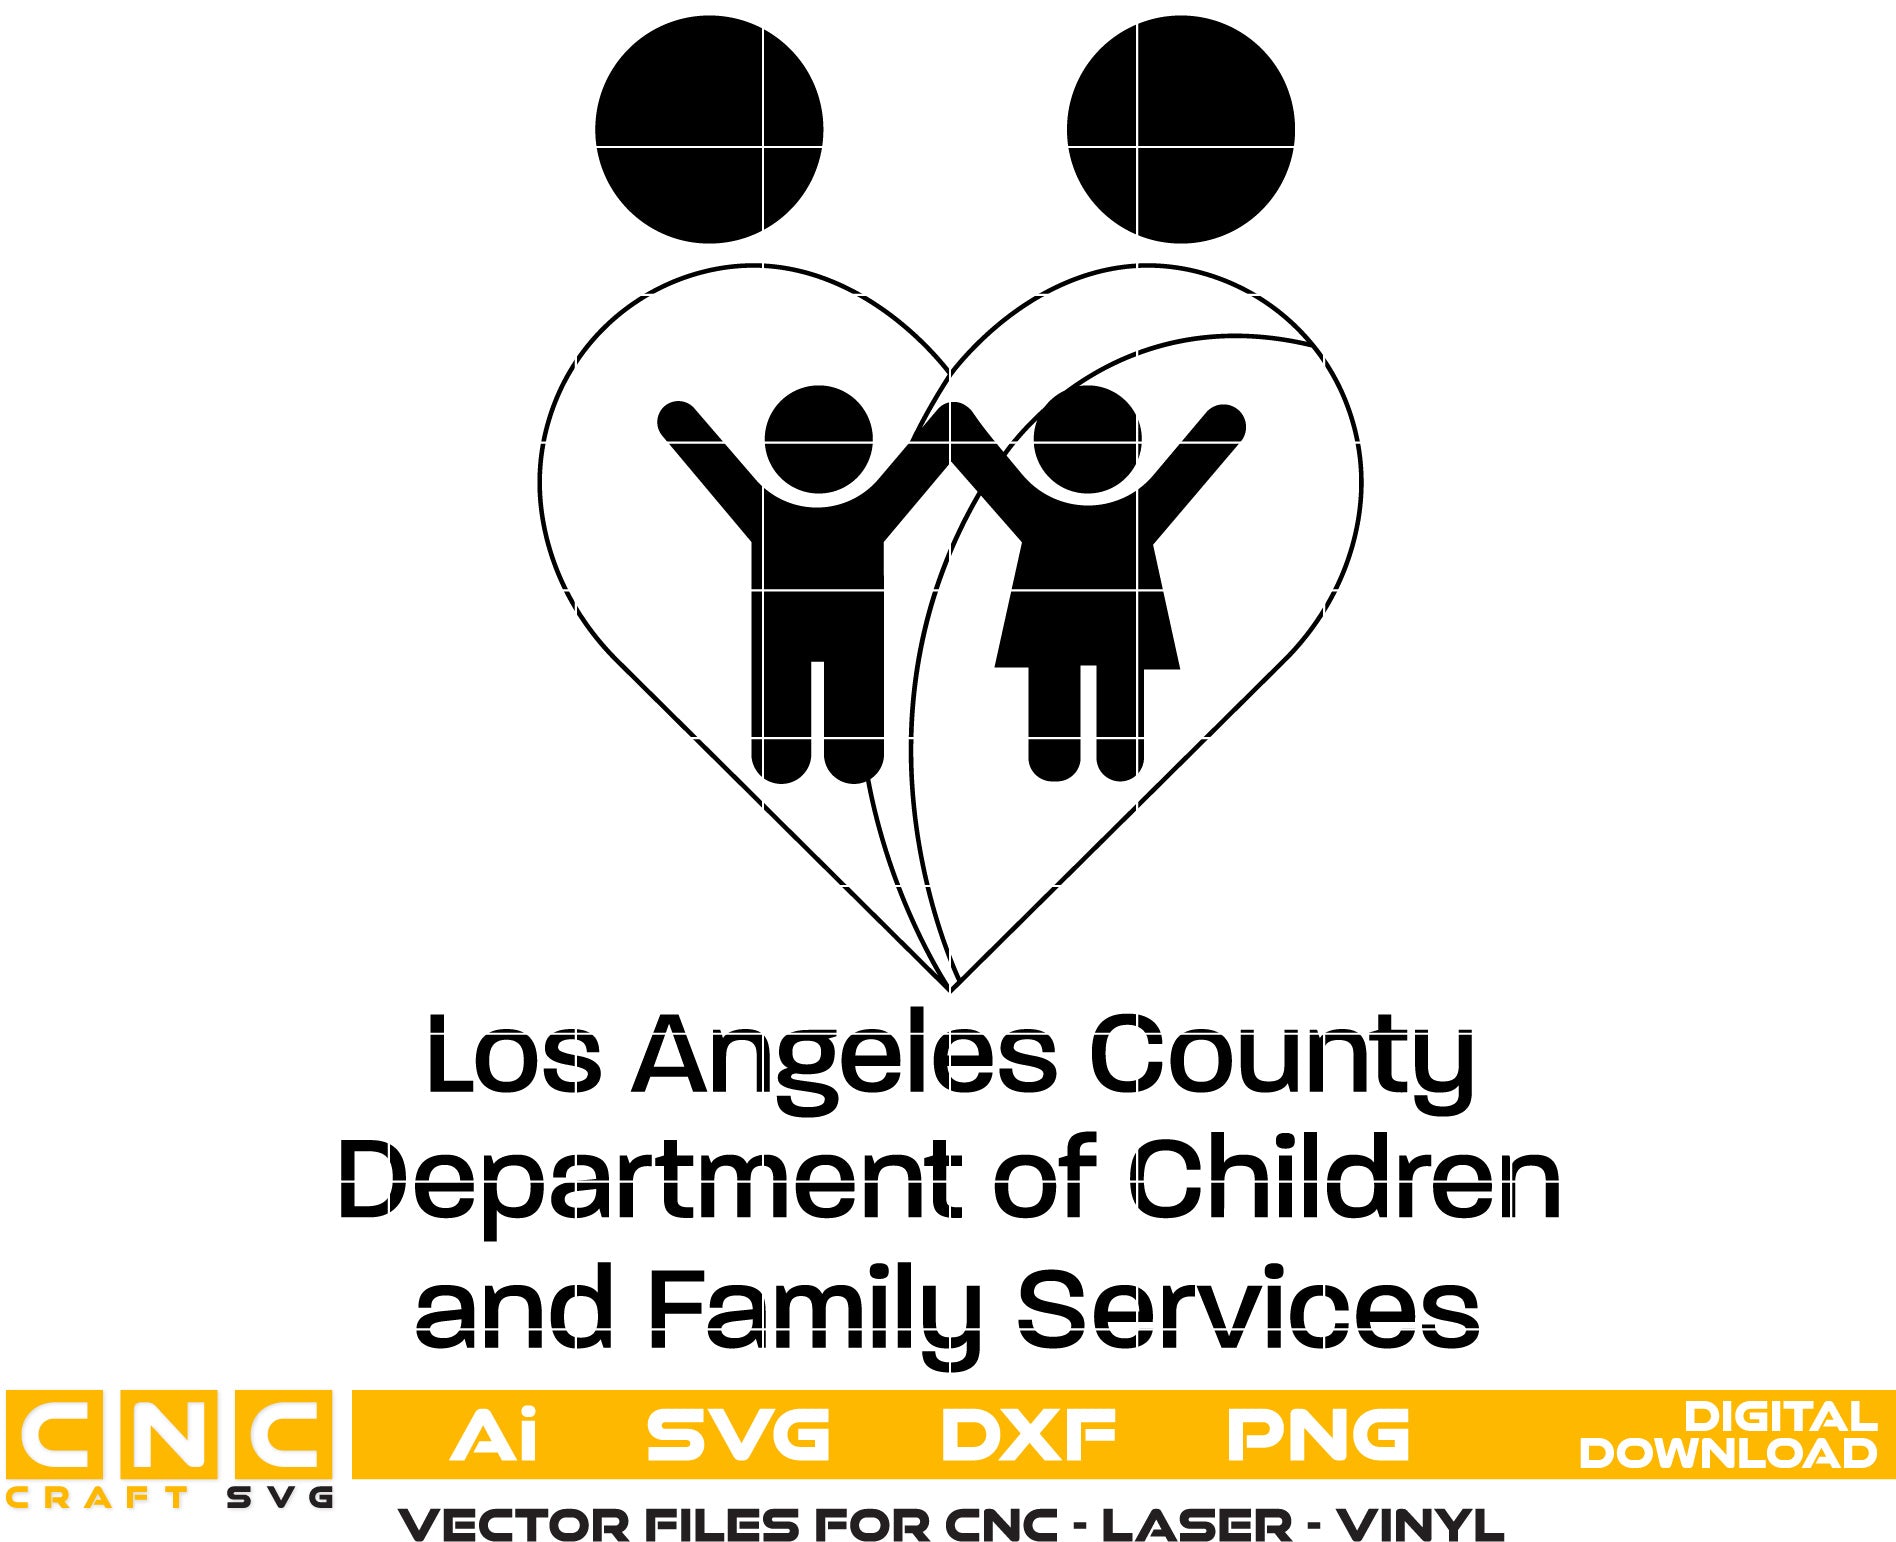 Children and Family Services Dept Los Angeles Logo Vector Art, Ai,SVG, DXF, PNG, Digital Files for Laser Engraving, Woodworking & Printing